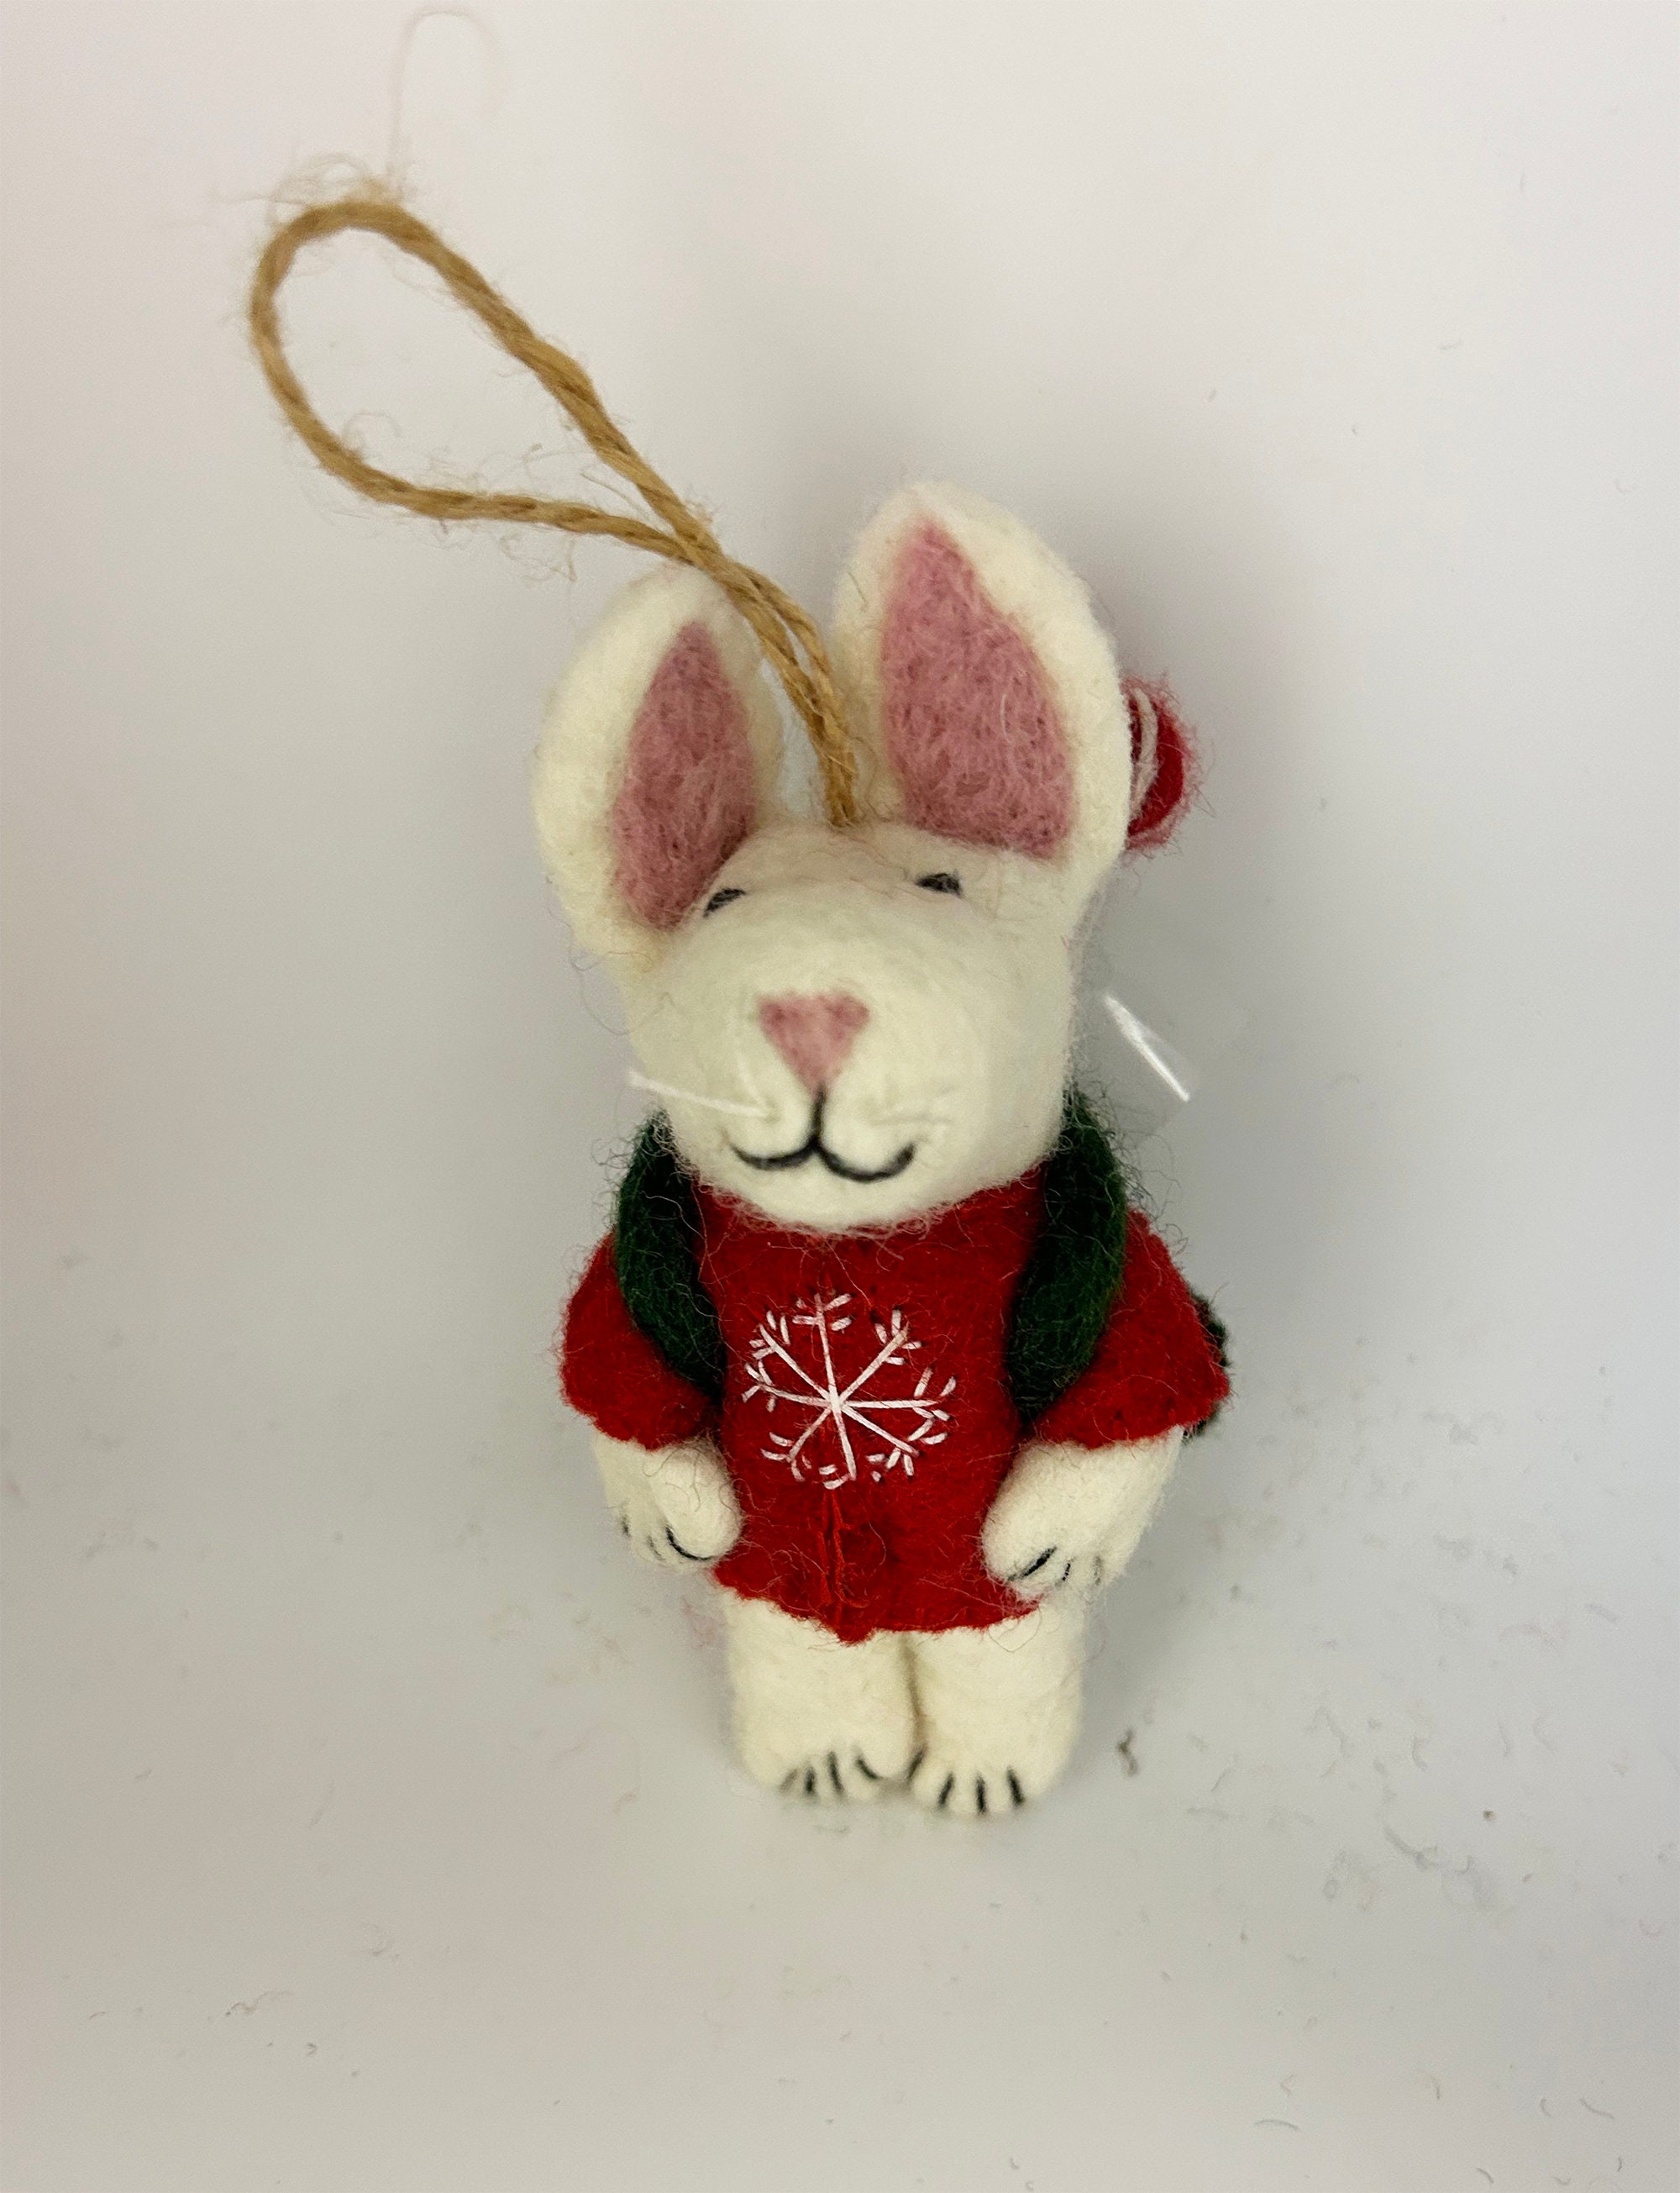 Etsy Bunny Stocking With Trade-handcrafted-made Felt christmas - Love Handmade Ornament-faire With Backpack Ireland